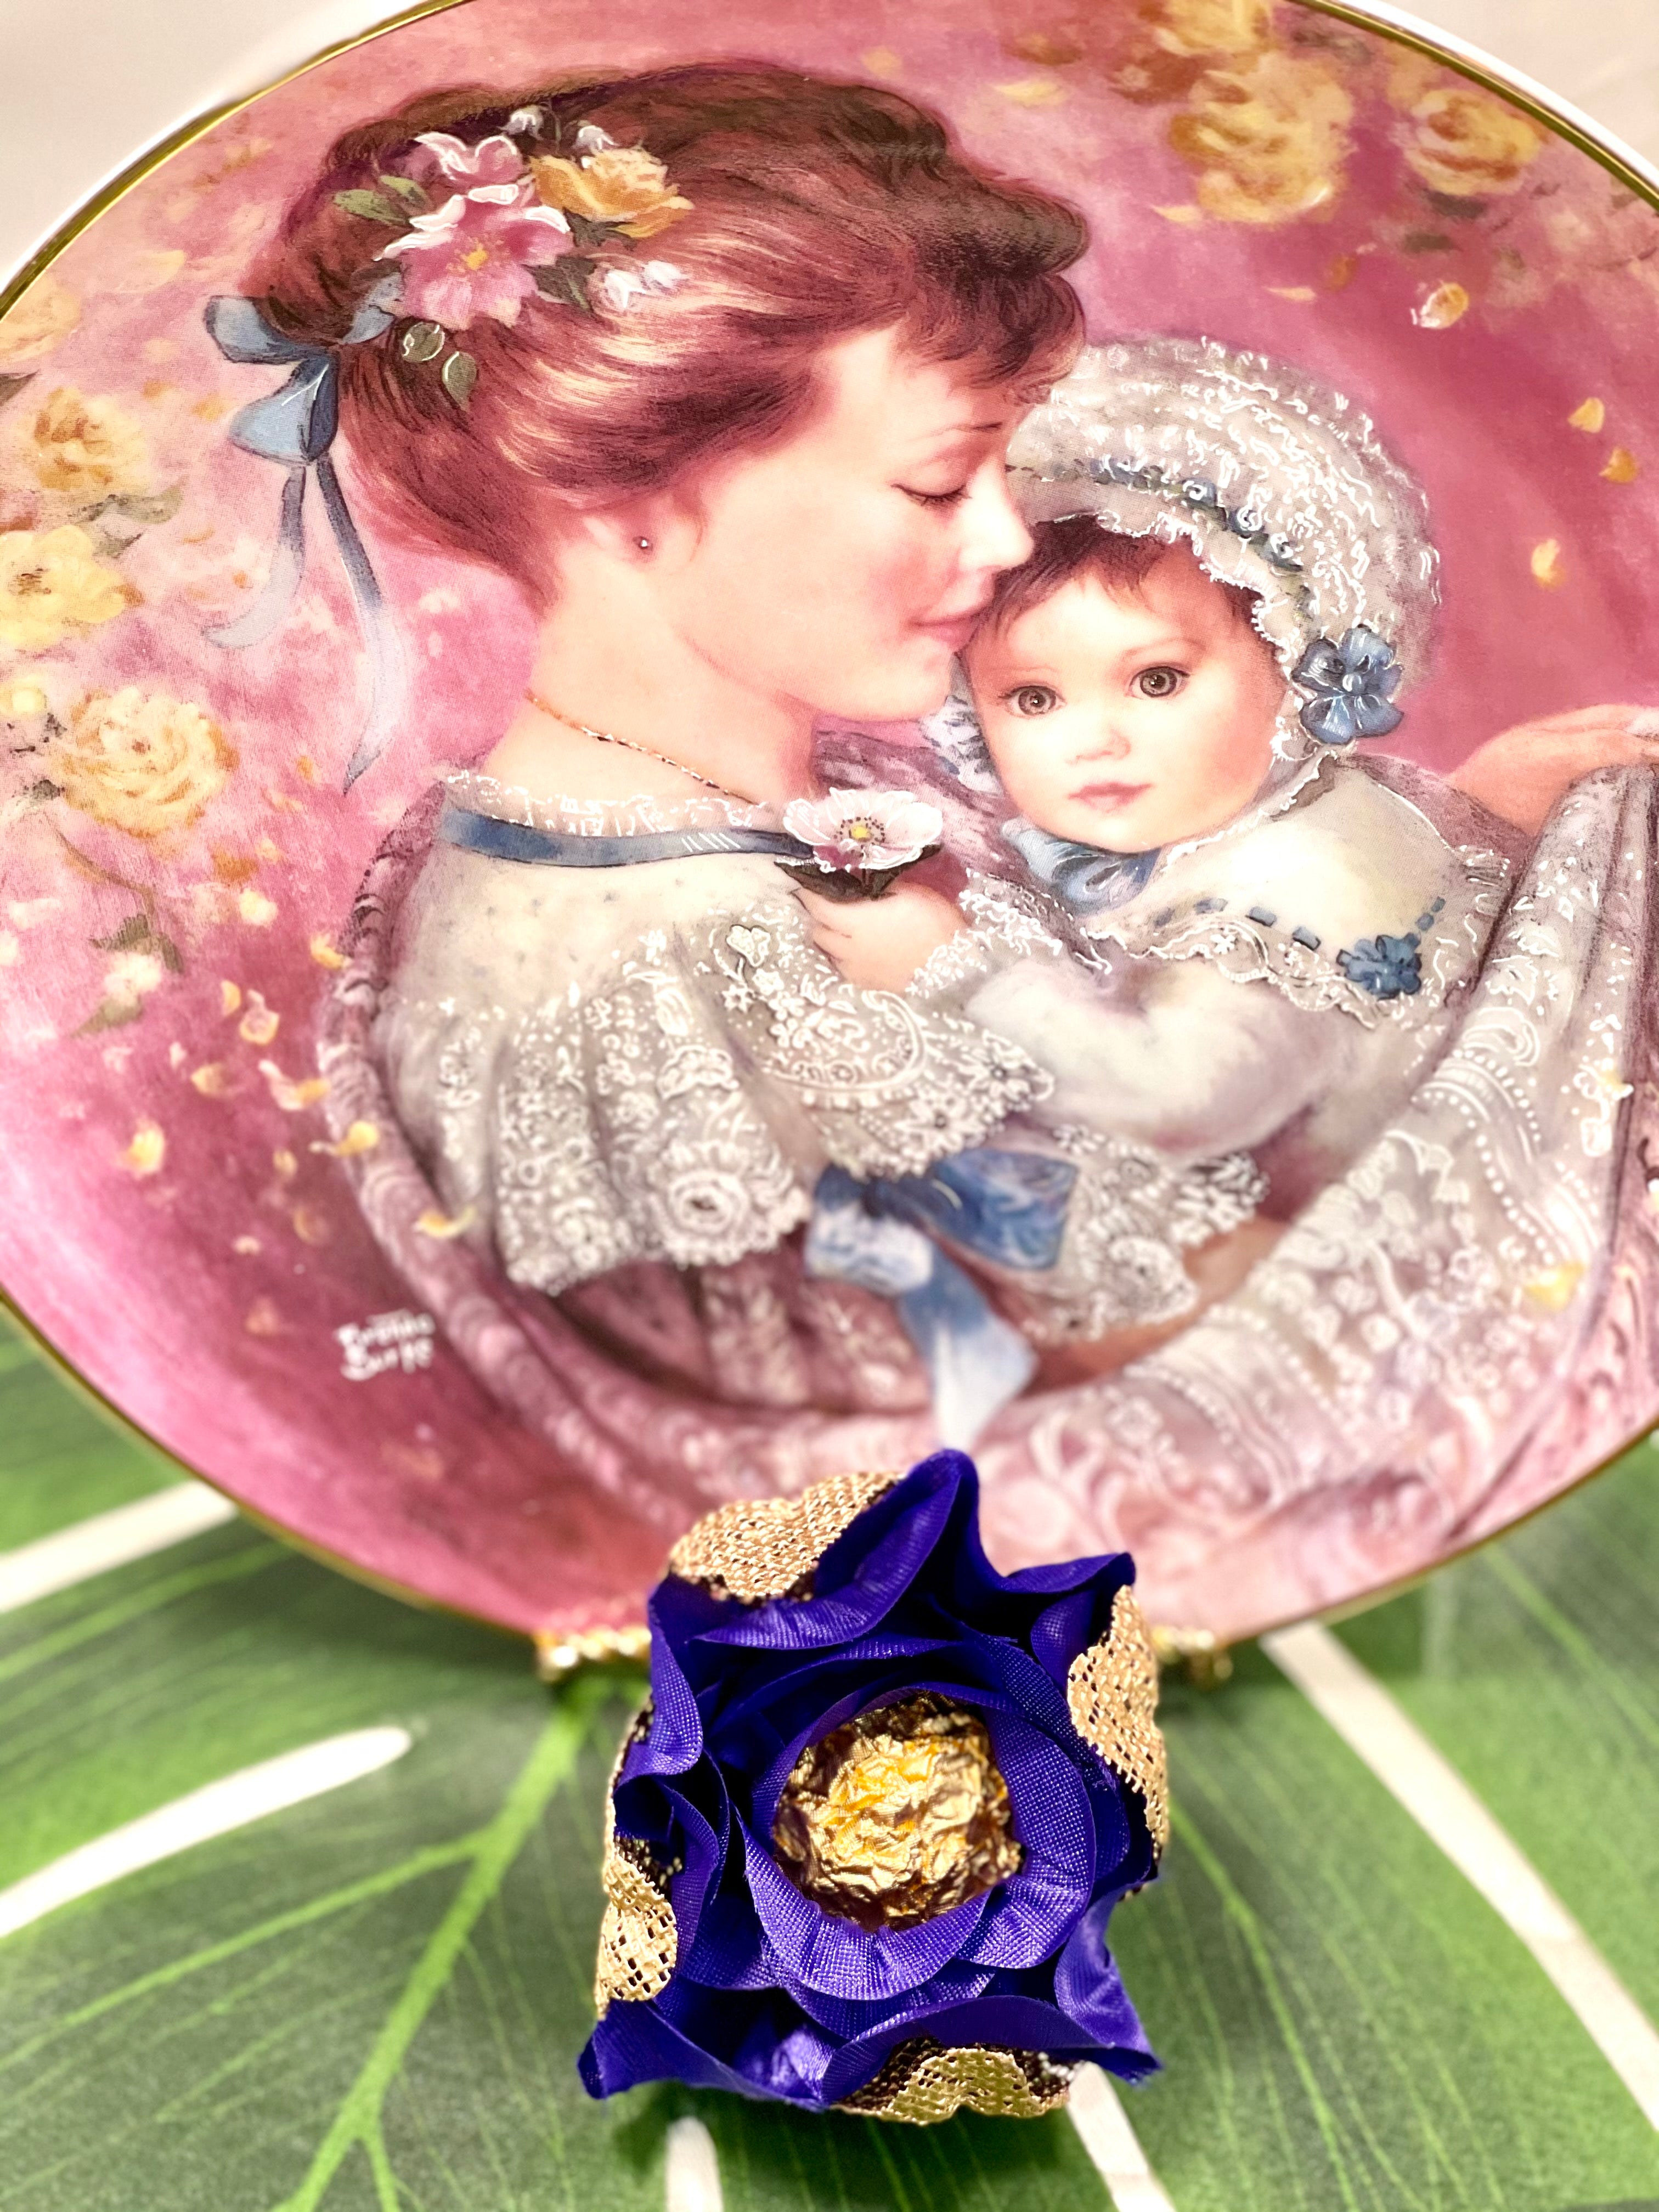 The image shows a decorative plate with a picture of a mother holding a child. In front of the plate sits a rosebud made of royal blue fabric with gold mesh. In the rose there is a chocolate truffle.